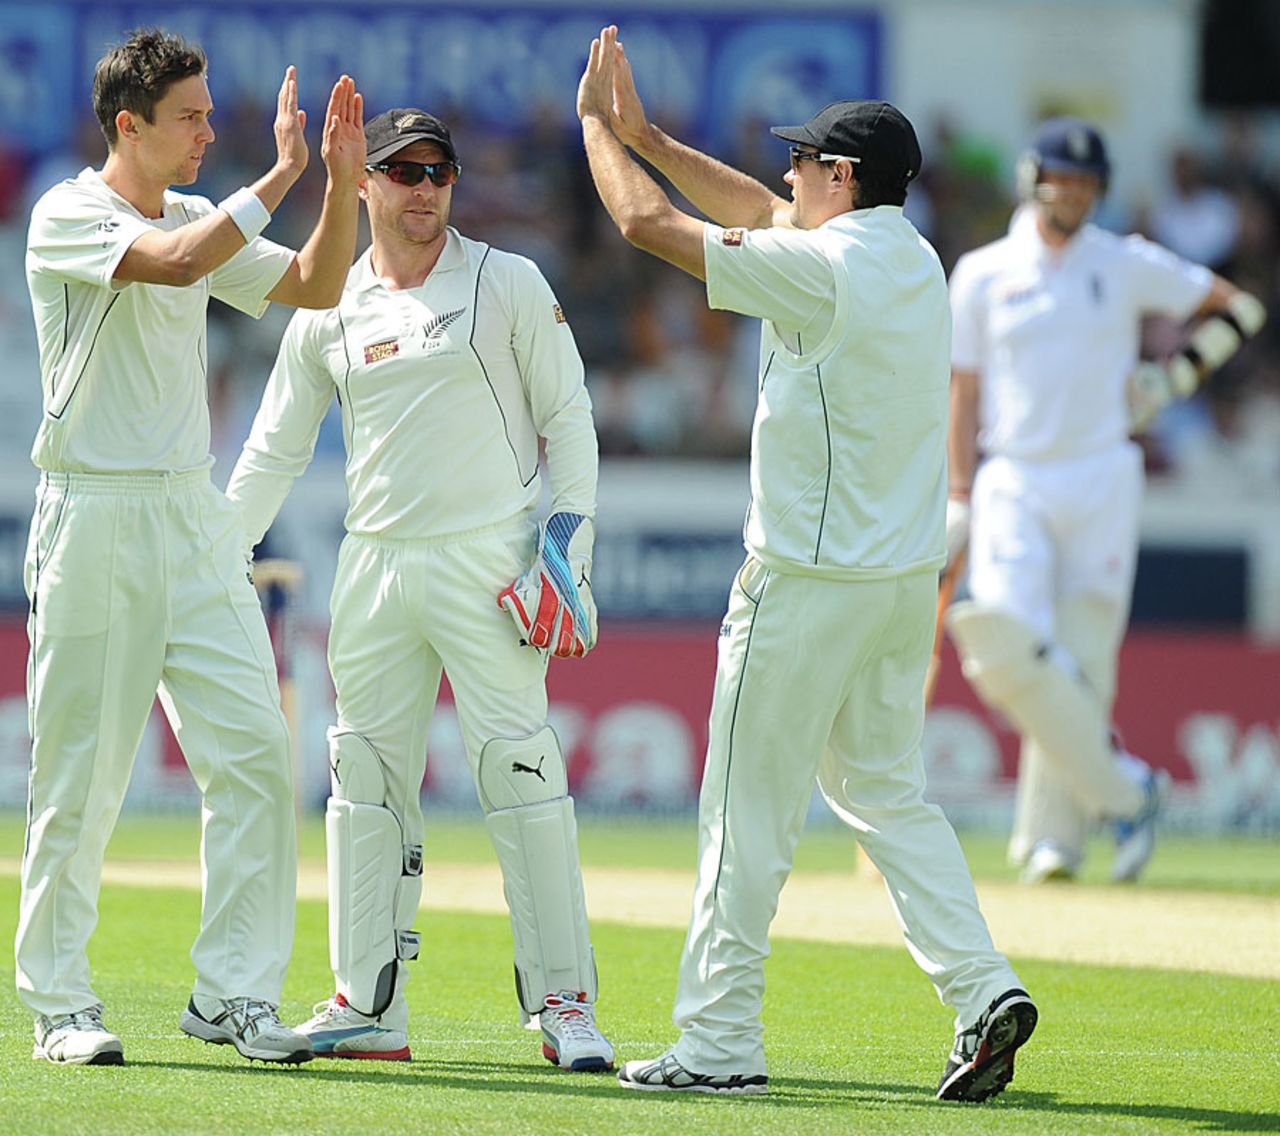 Trent Boult took 5 for 57 to wrap up the innings, England v New Zealand, 2nd Investec Test, Headingley, 3rd day, May 26, 2013